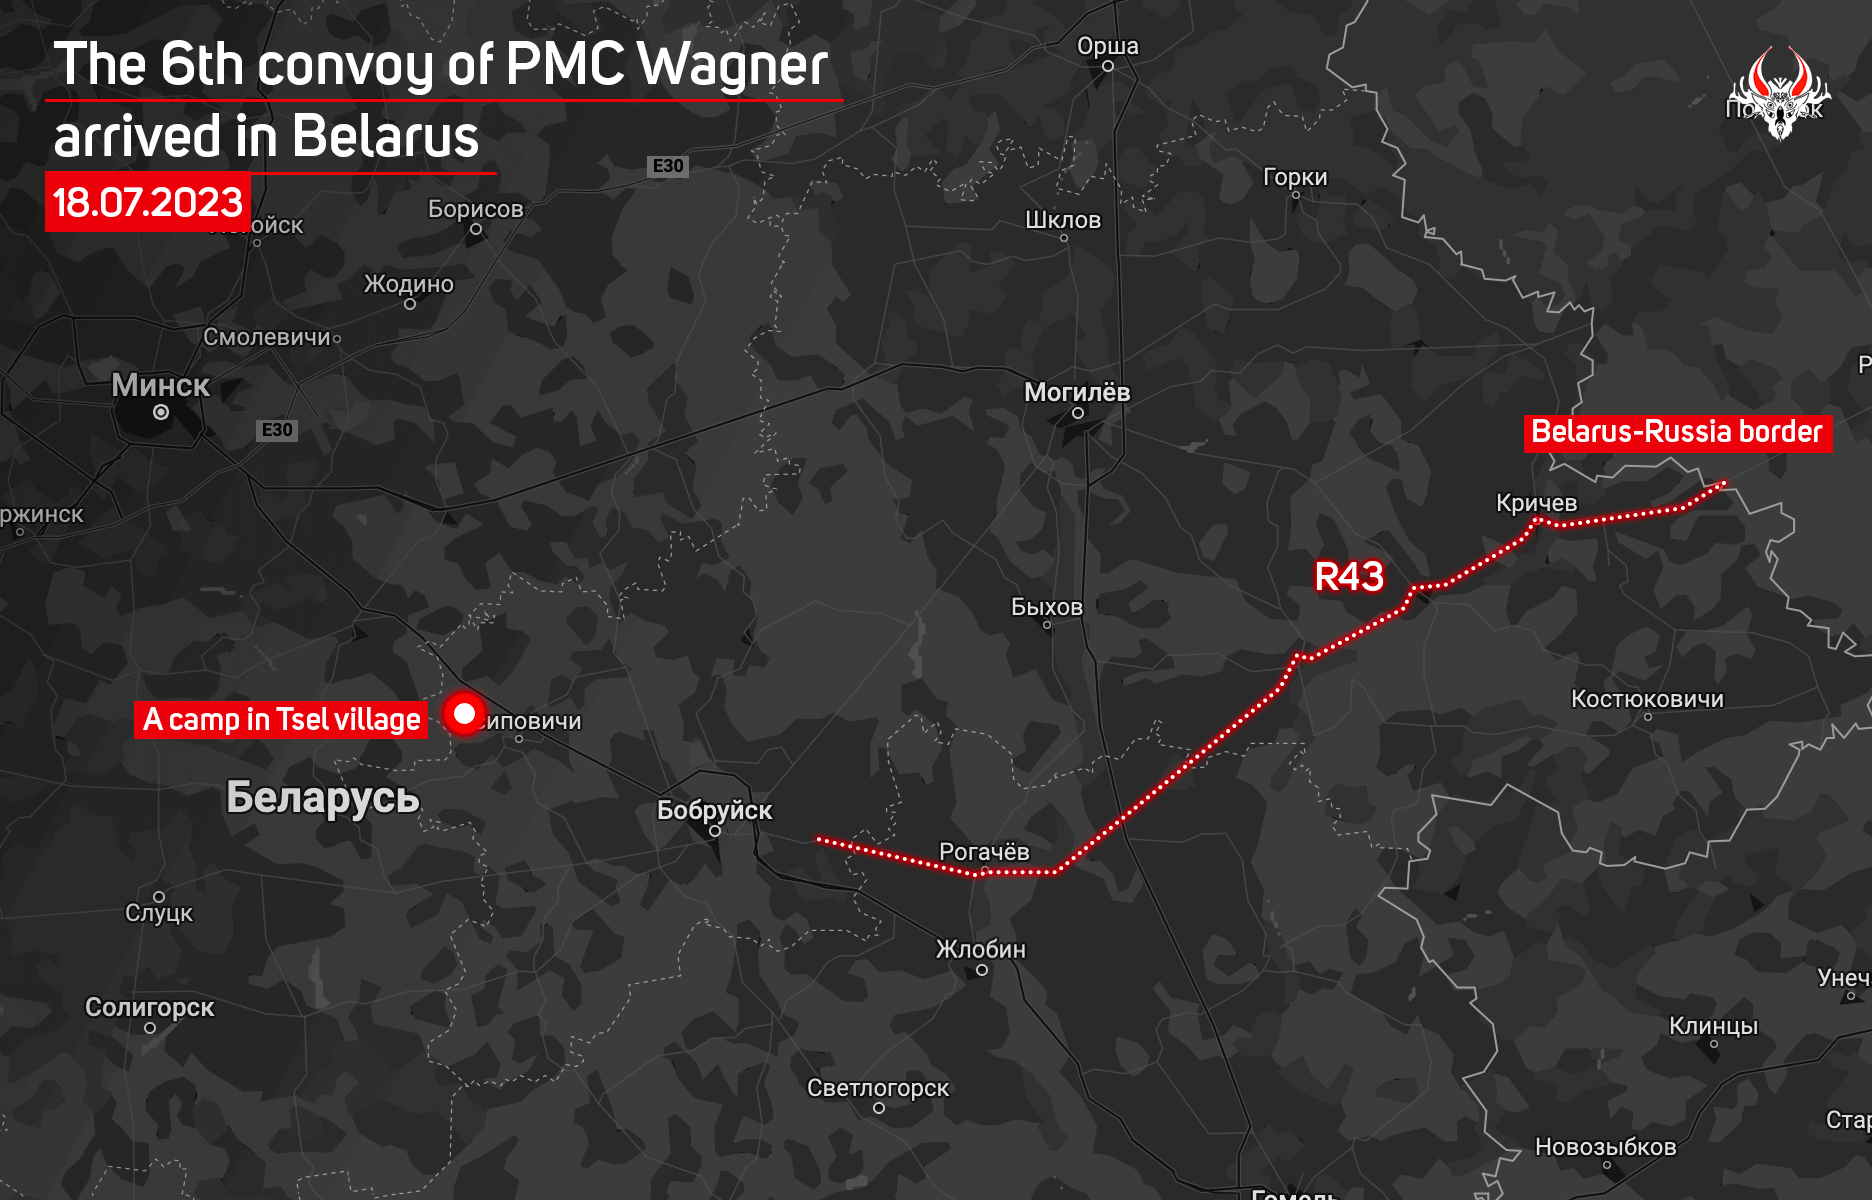 The 6th convoy of PMC Wagner is moving along the R43-M5 highway right now